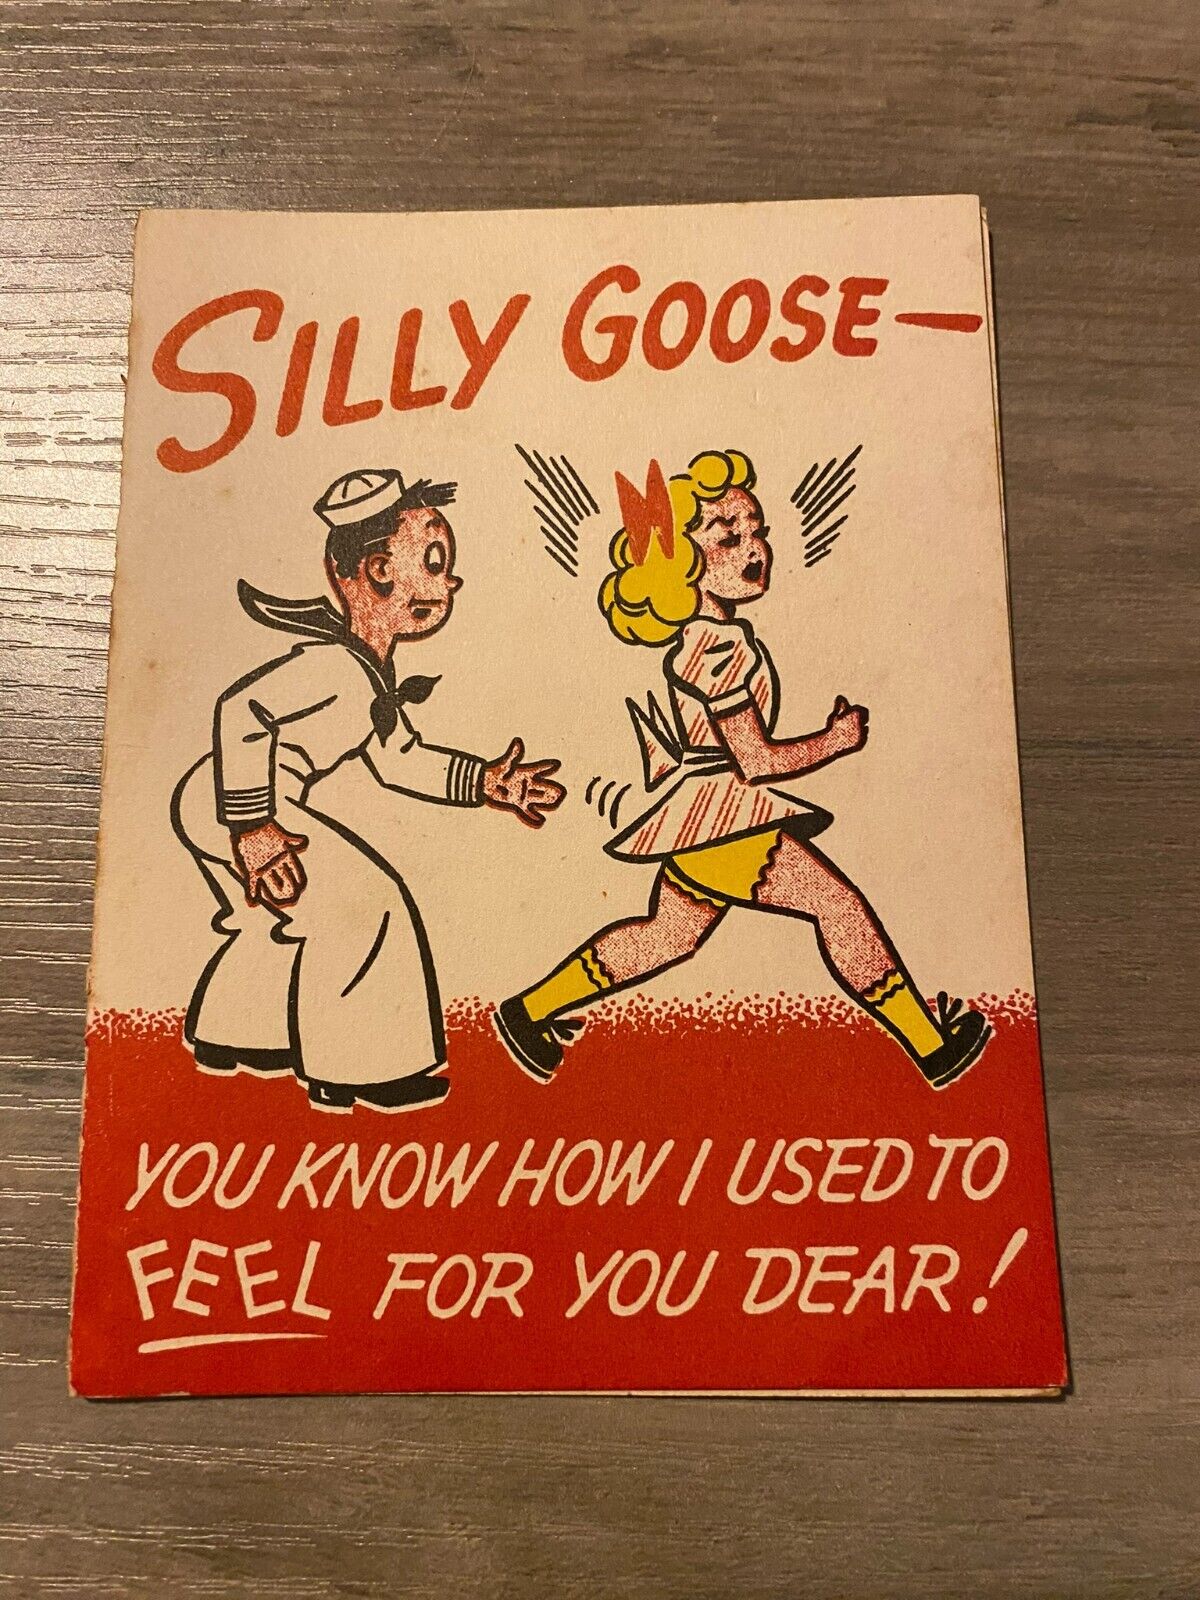 WWII Era Gag Risque Greeting Card Navy Sailor Silly Goose Girl Sweetheart Love